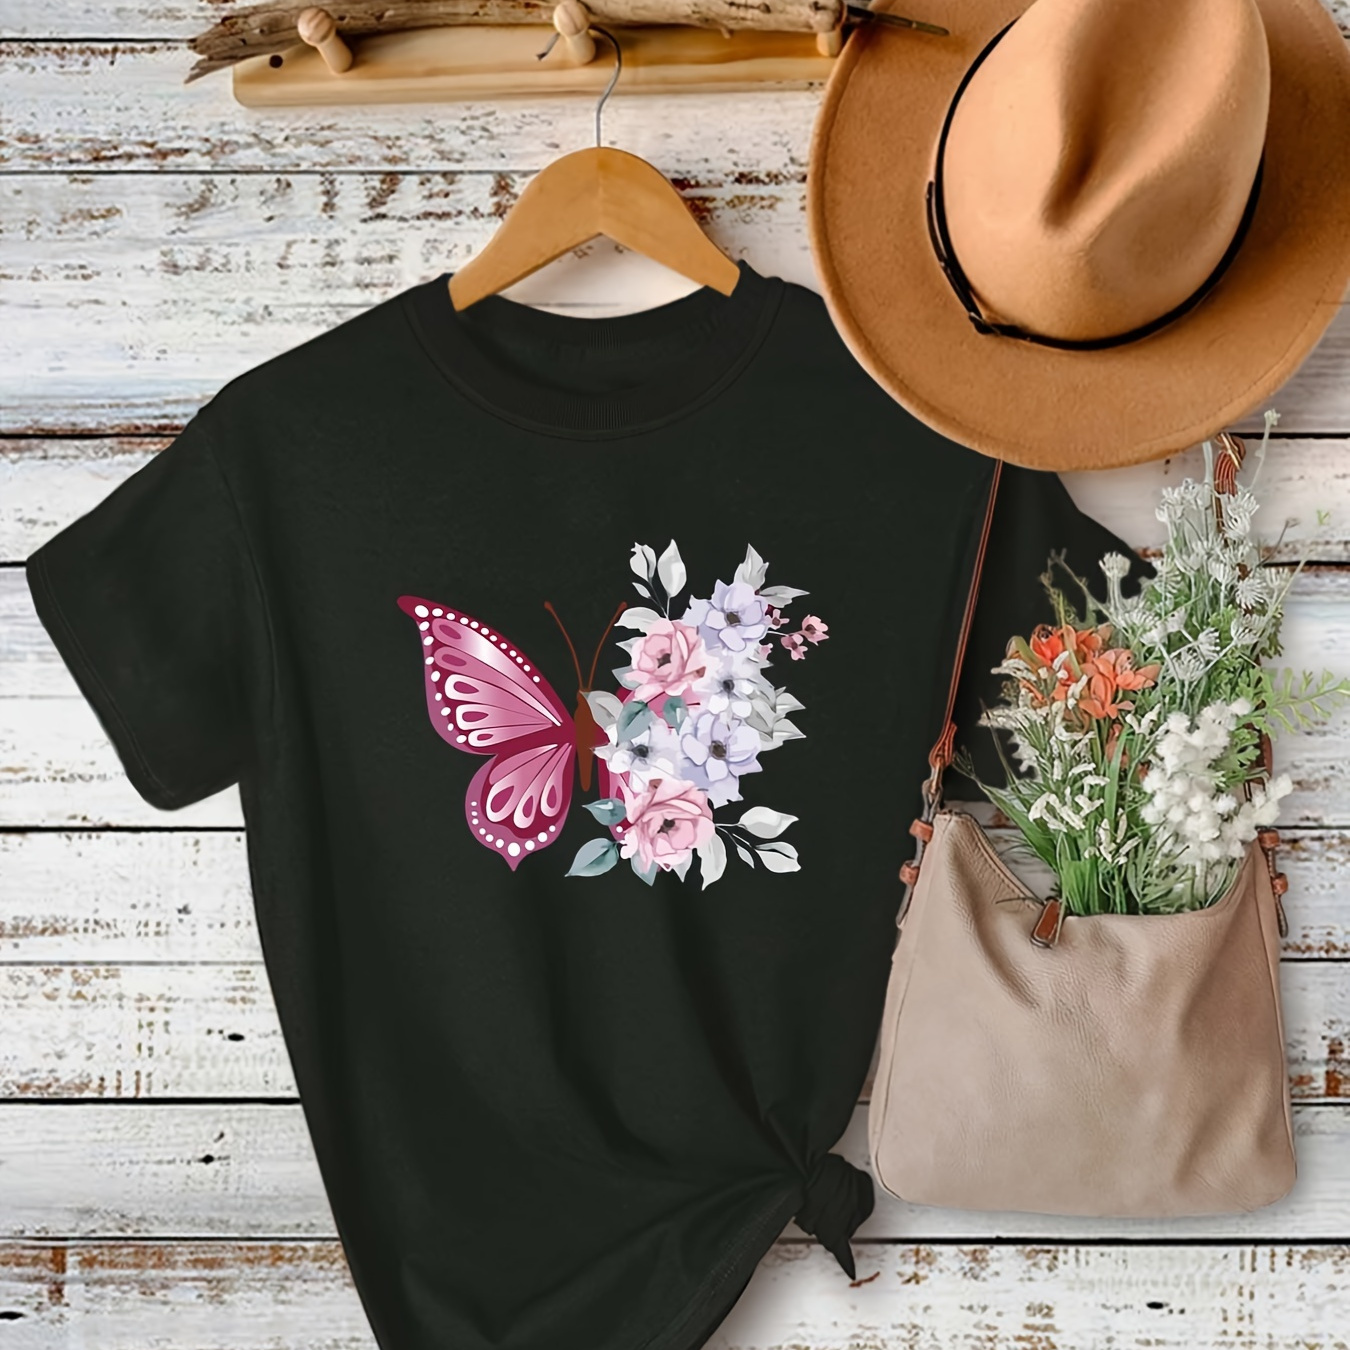 

Butterflies And Flowers Print Crew Neck T-shirt, Loose Casual Short Sleeve Fashion Summer T-shirts Tops, Women's Clothing